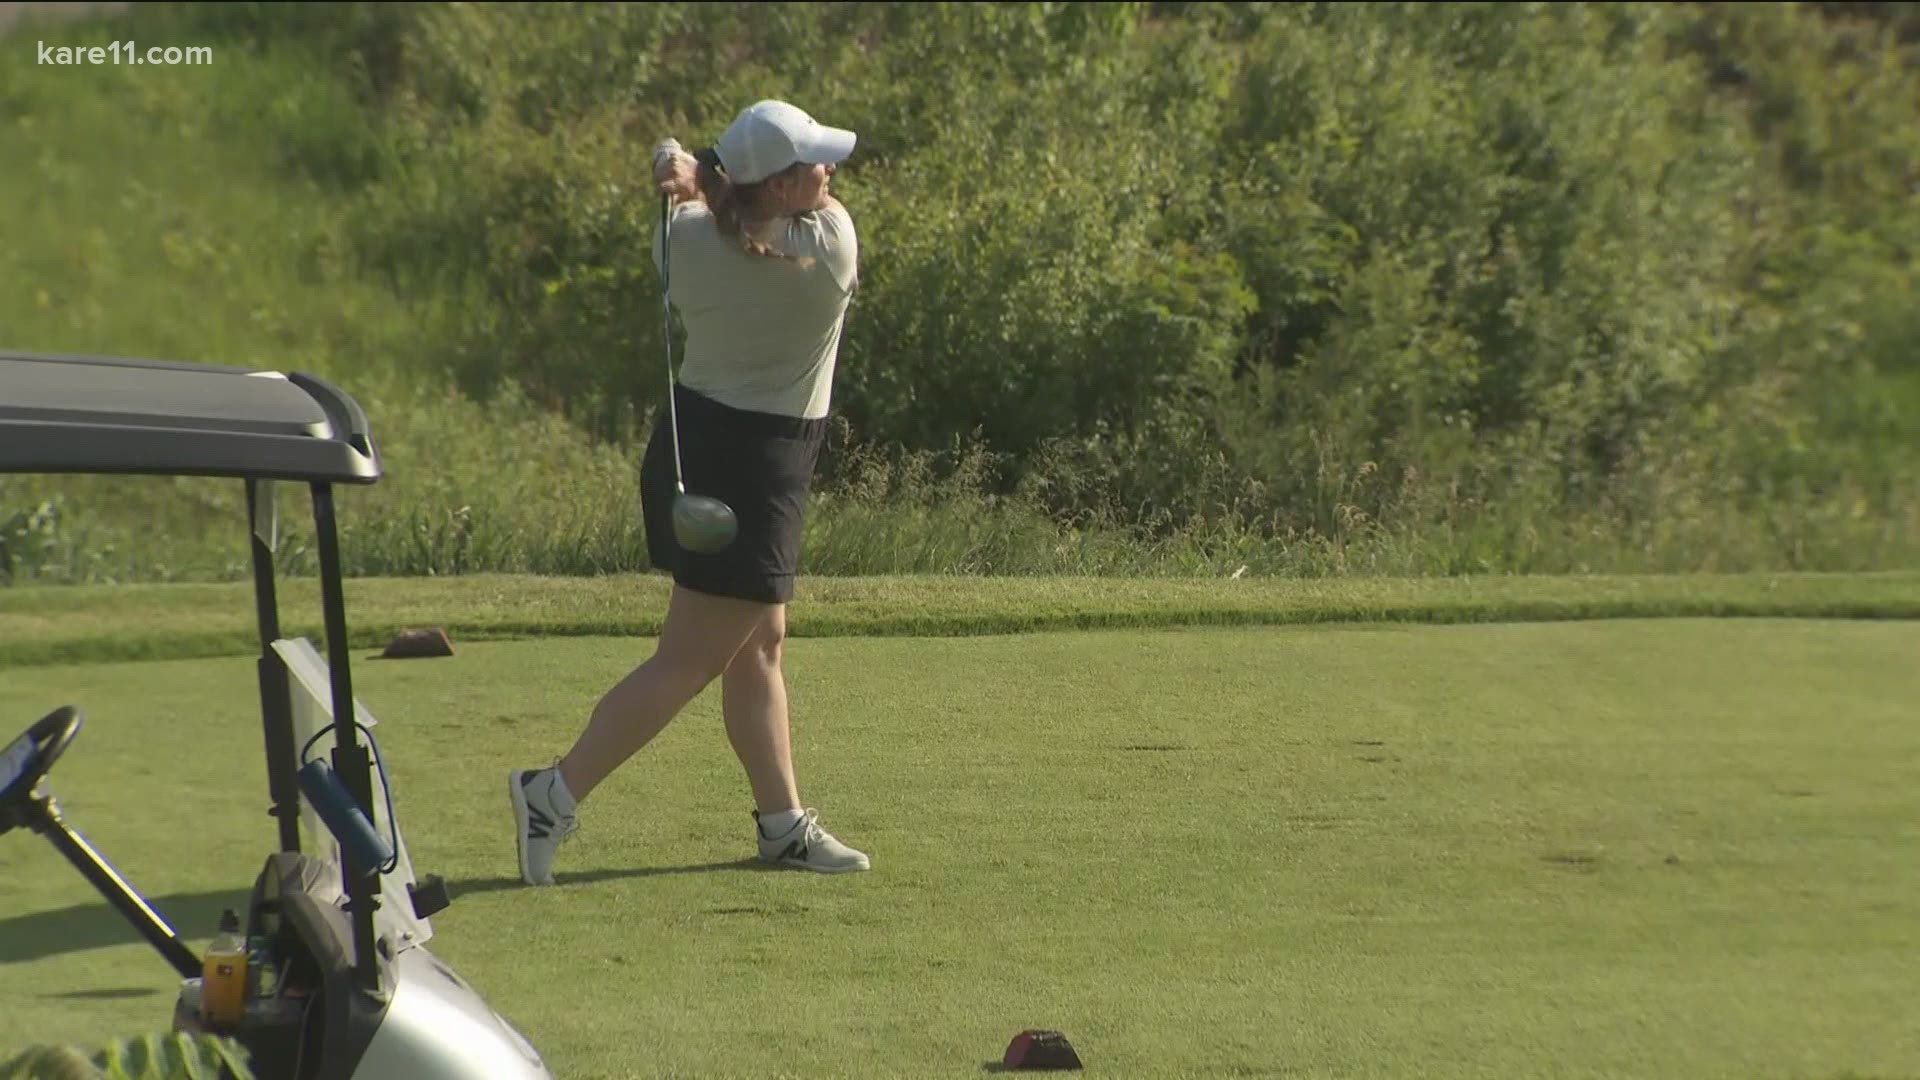 Royal Golf Club in Lake Elmo hosted golfers in the global golf event on Tuesday.